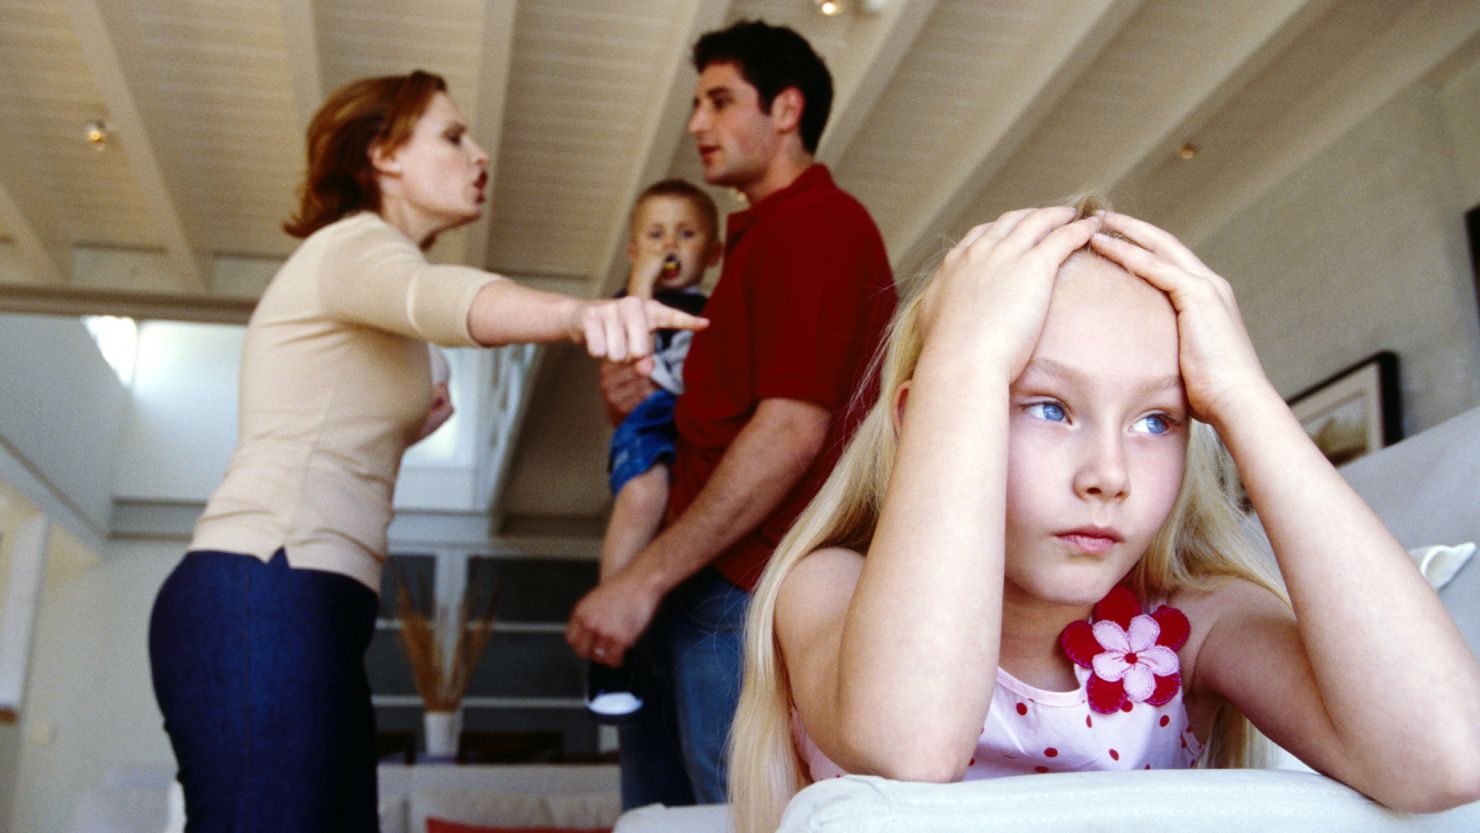 Parents made headlines in 2011 by putting their children through ridiculous situations. 